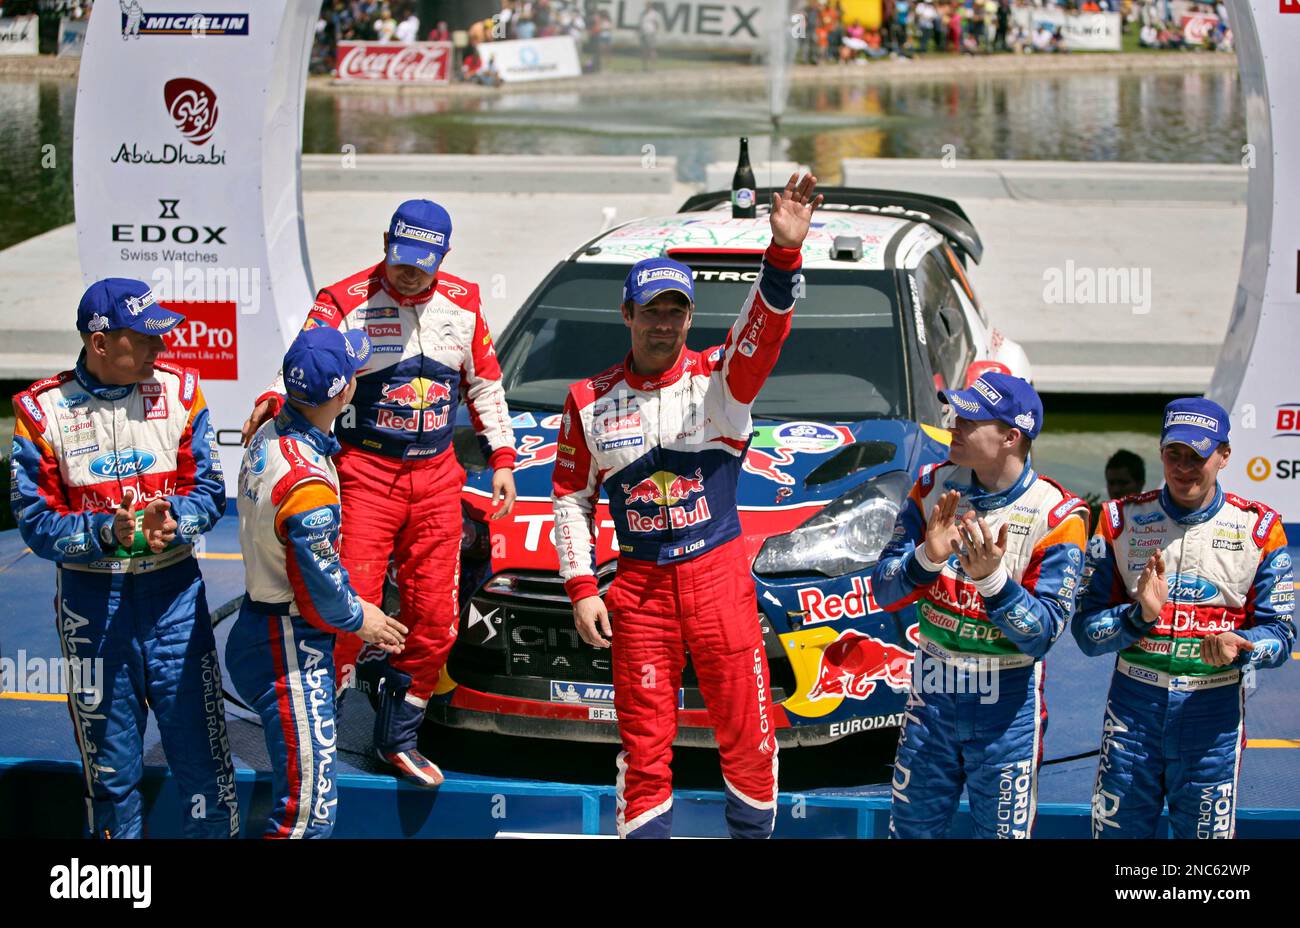 Citroen Total World Rally team driver Sebastien Loeb, third from right, from France, and co-driver Daniel Elena, third from left, from Monaco, celebrate after winning the Mexico Rally, with second place Ford Abu Dhabi World Rally Team, Mikko Hirvonen, left, and Jarmo Lehtinen, from Finland, second from left, and third place Ford Abu Dhabi World Rally Team Jari-Matti Latvala, right, and Miikka Anttila, also from Finland, in Leon, Mexico, Sunday, March 6, 2011. Loeb, a seven-time world champion, beat Finnish driver Mikko Hirvonen to win the Mexican Rally for the fifth time. Loeb took first place Banque D'Images